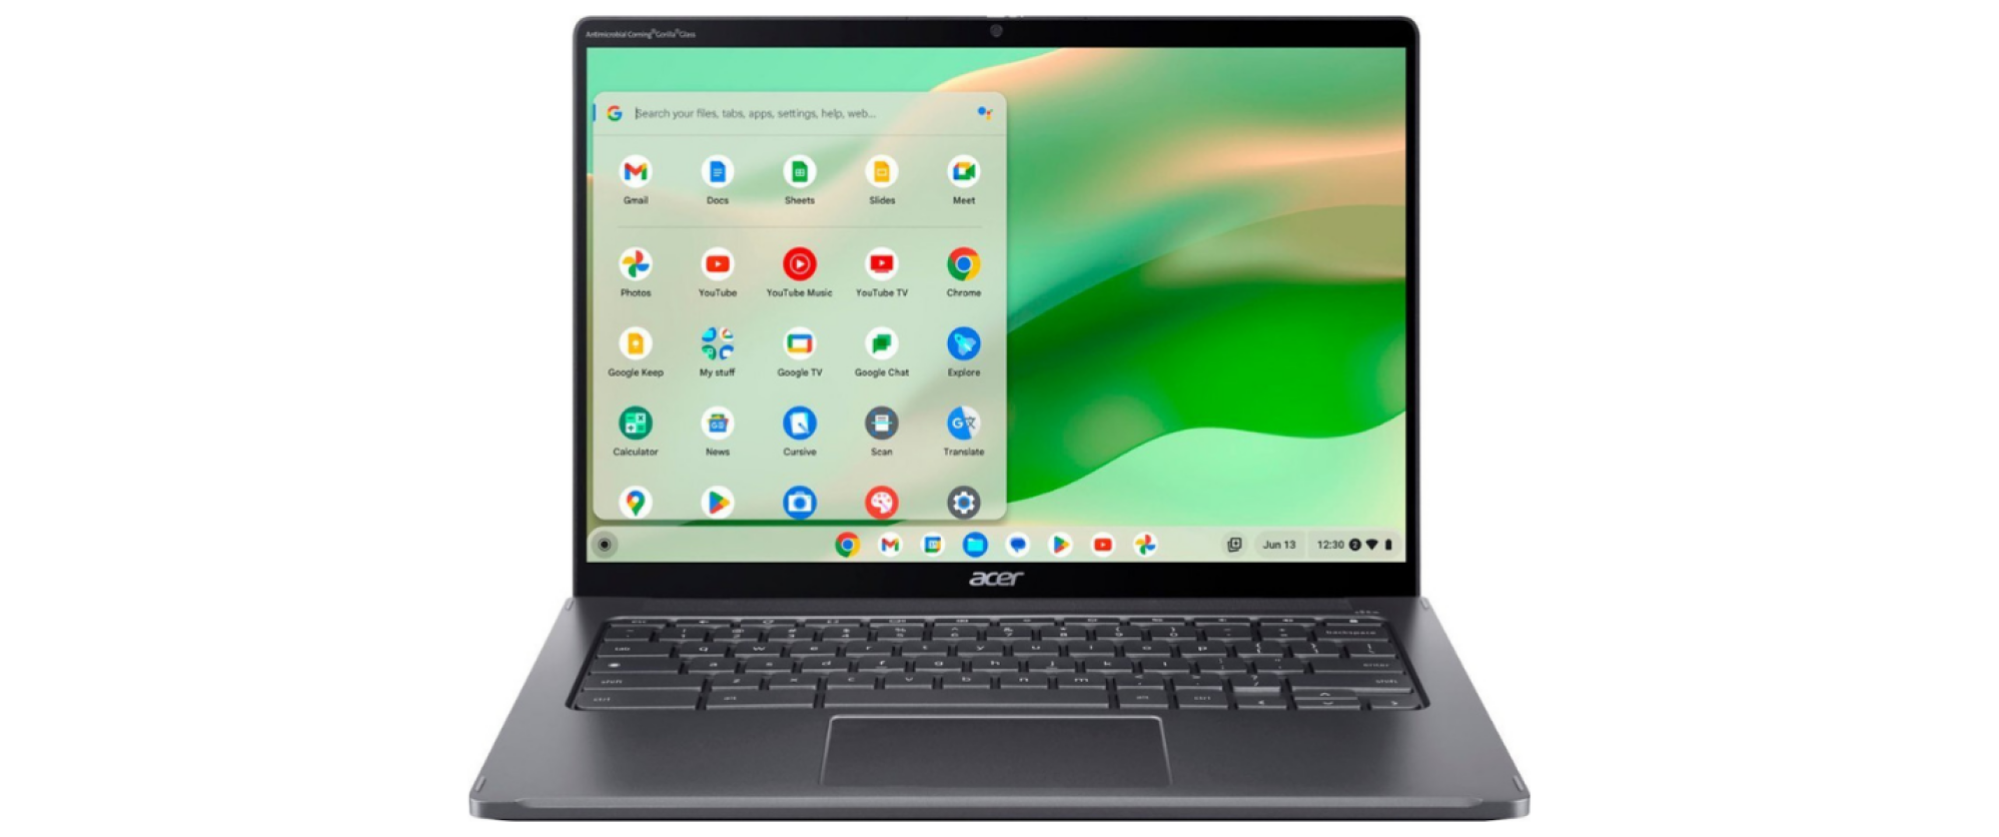 Acer Chromebook Spin 714 laptop with green design on desktop, showing multiple icons